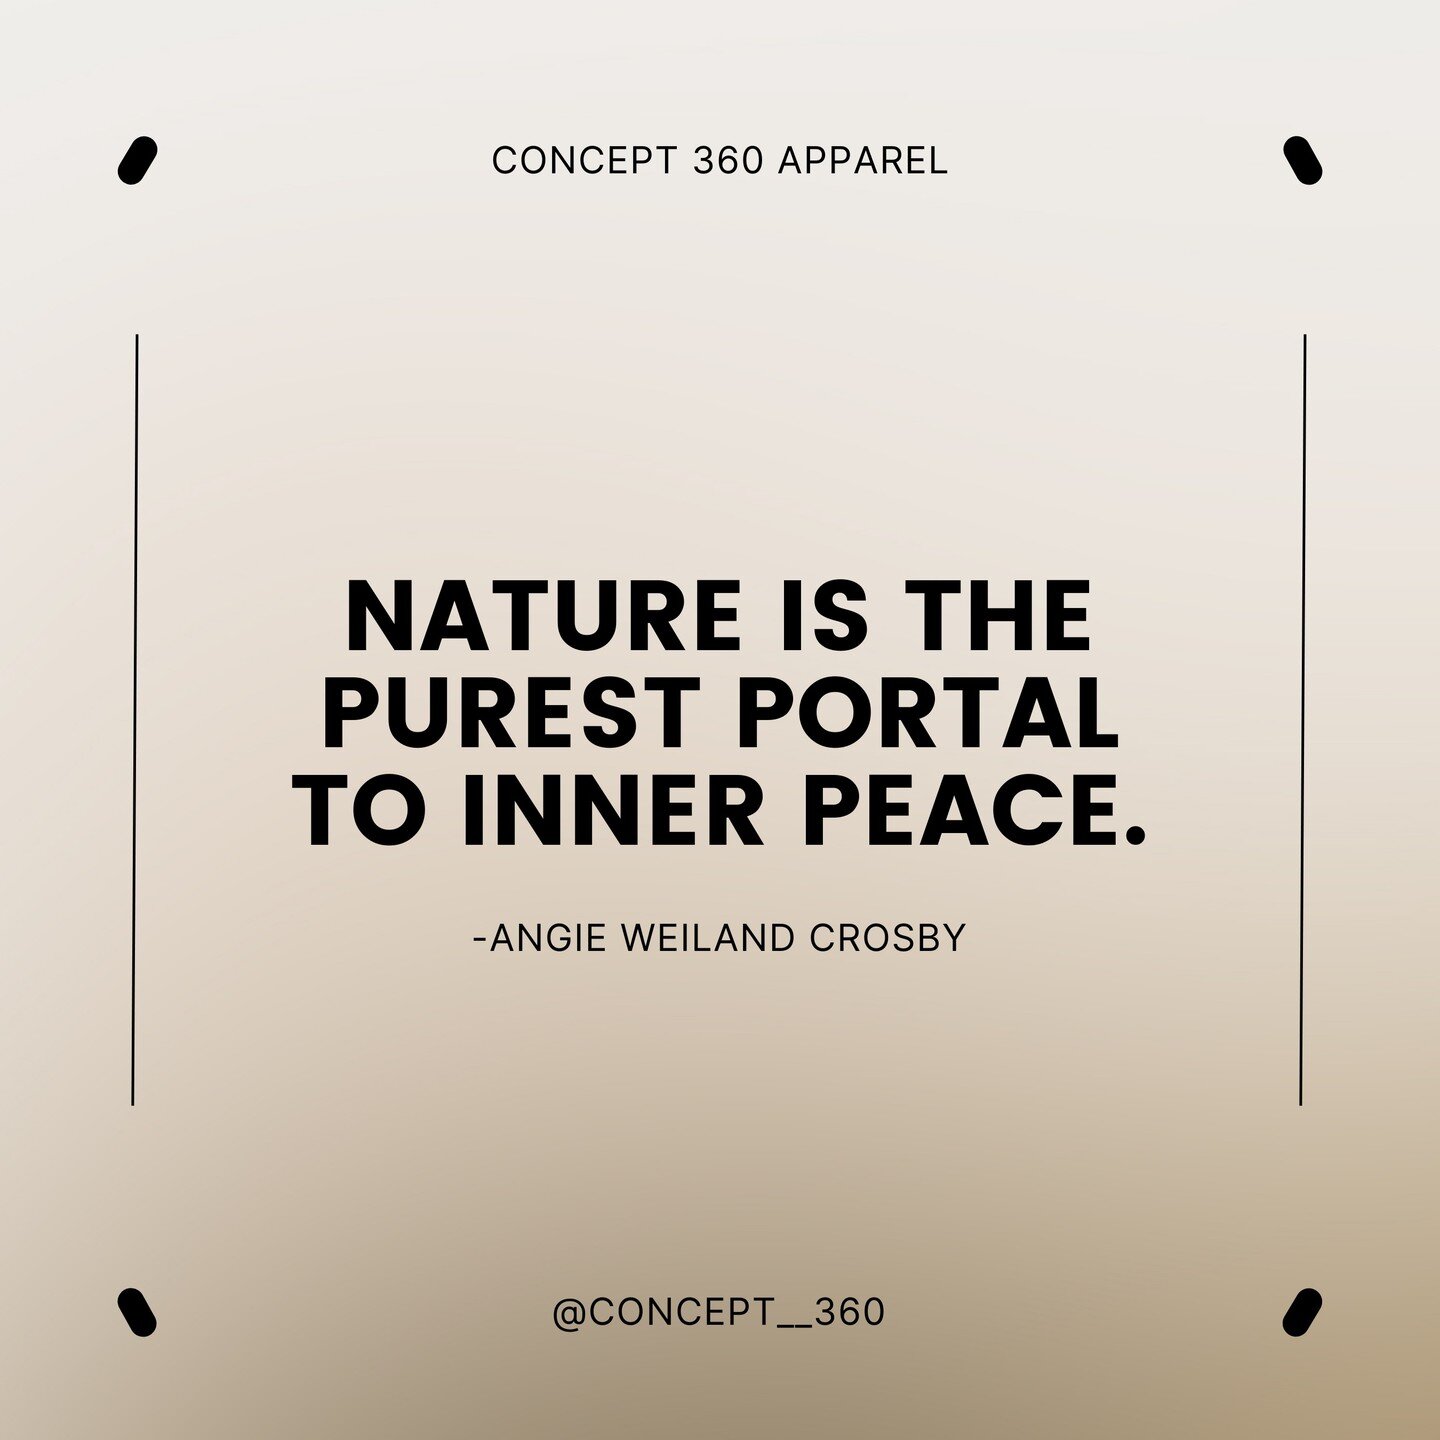 Inner peace finds its truest reflection in nature's embrace. At Concept 360, we honor this connection. We wear nature's stories, advocate for its protection, and with every purchase, fuel its future. Join us on the journey, wander responsibly, shop c